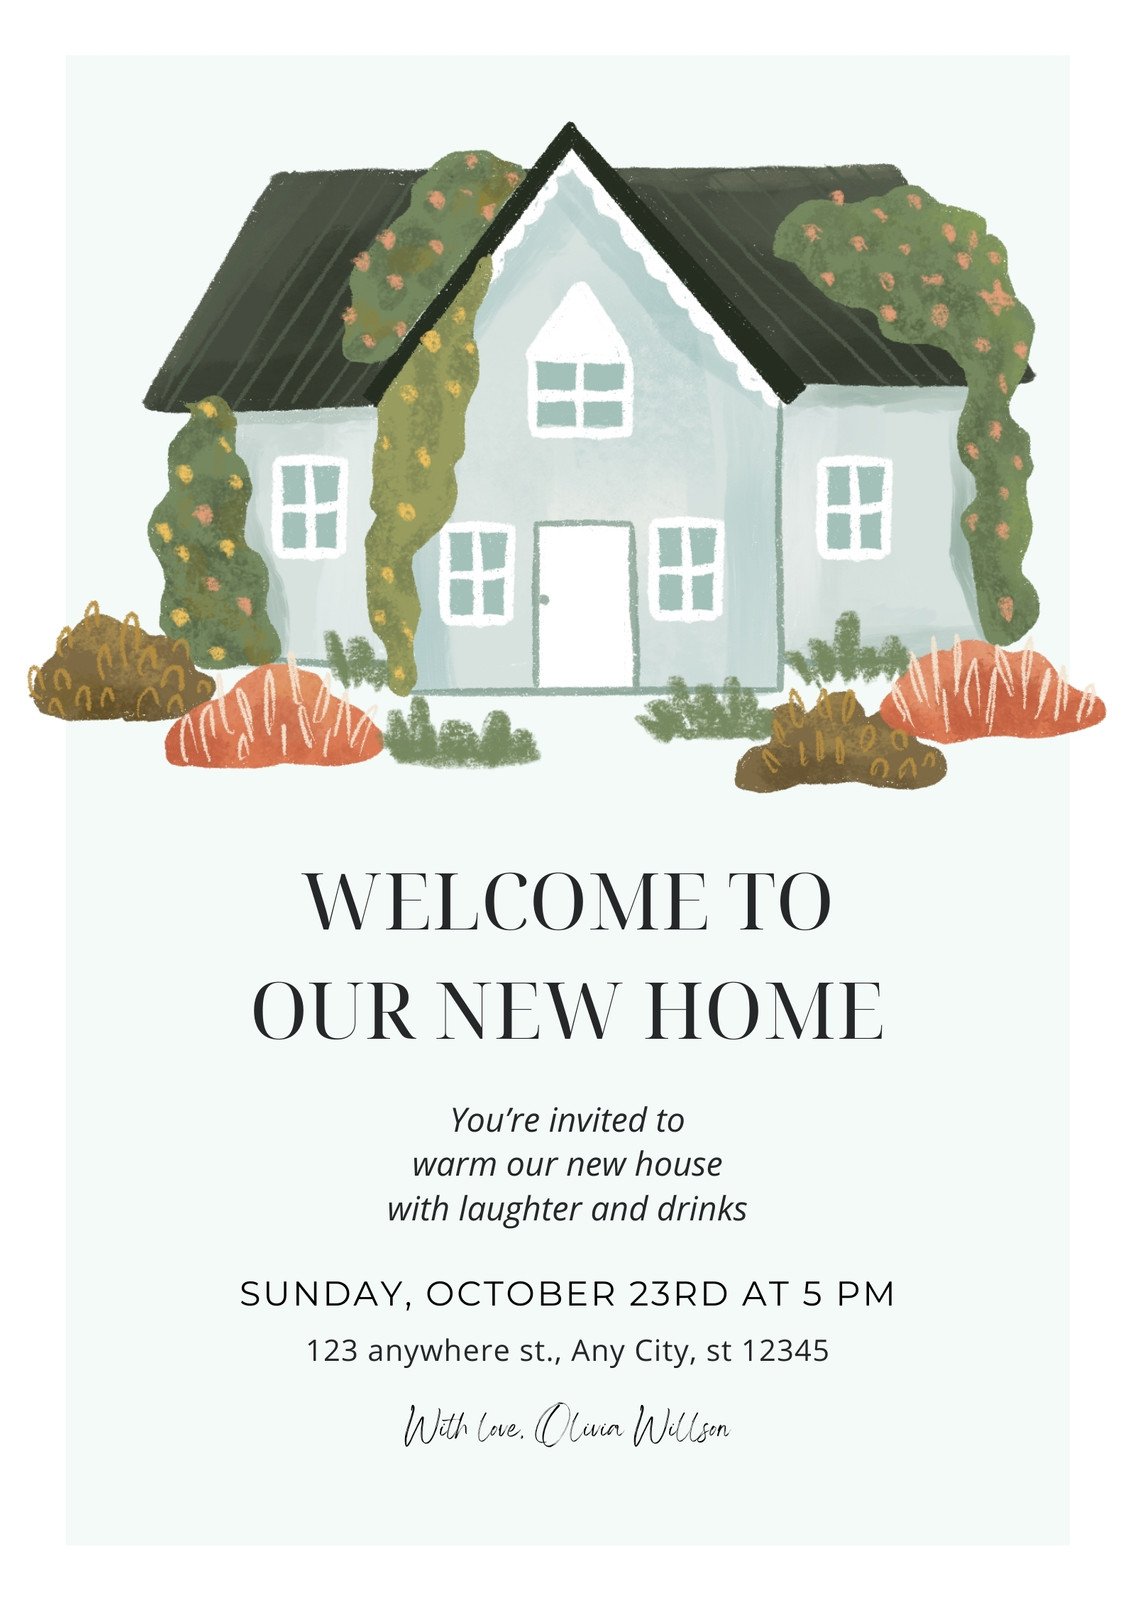 Invitation for a housewarming party